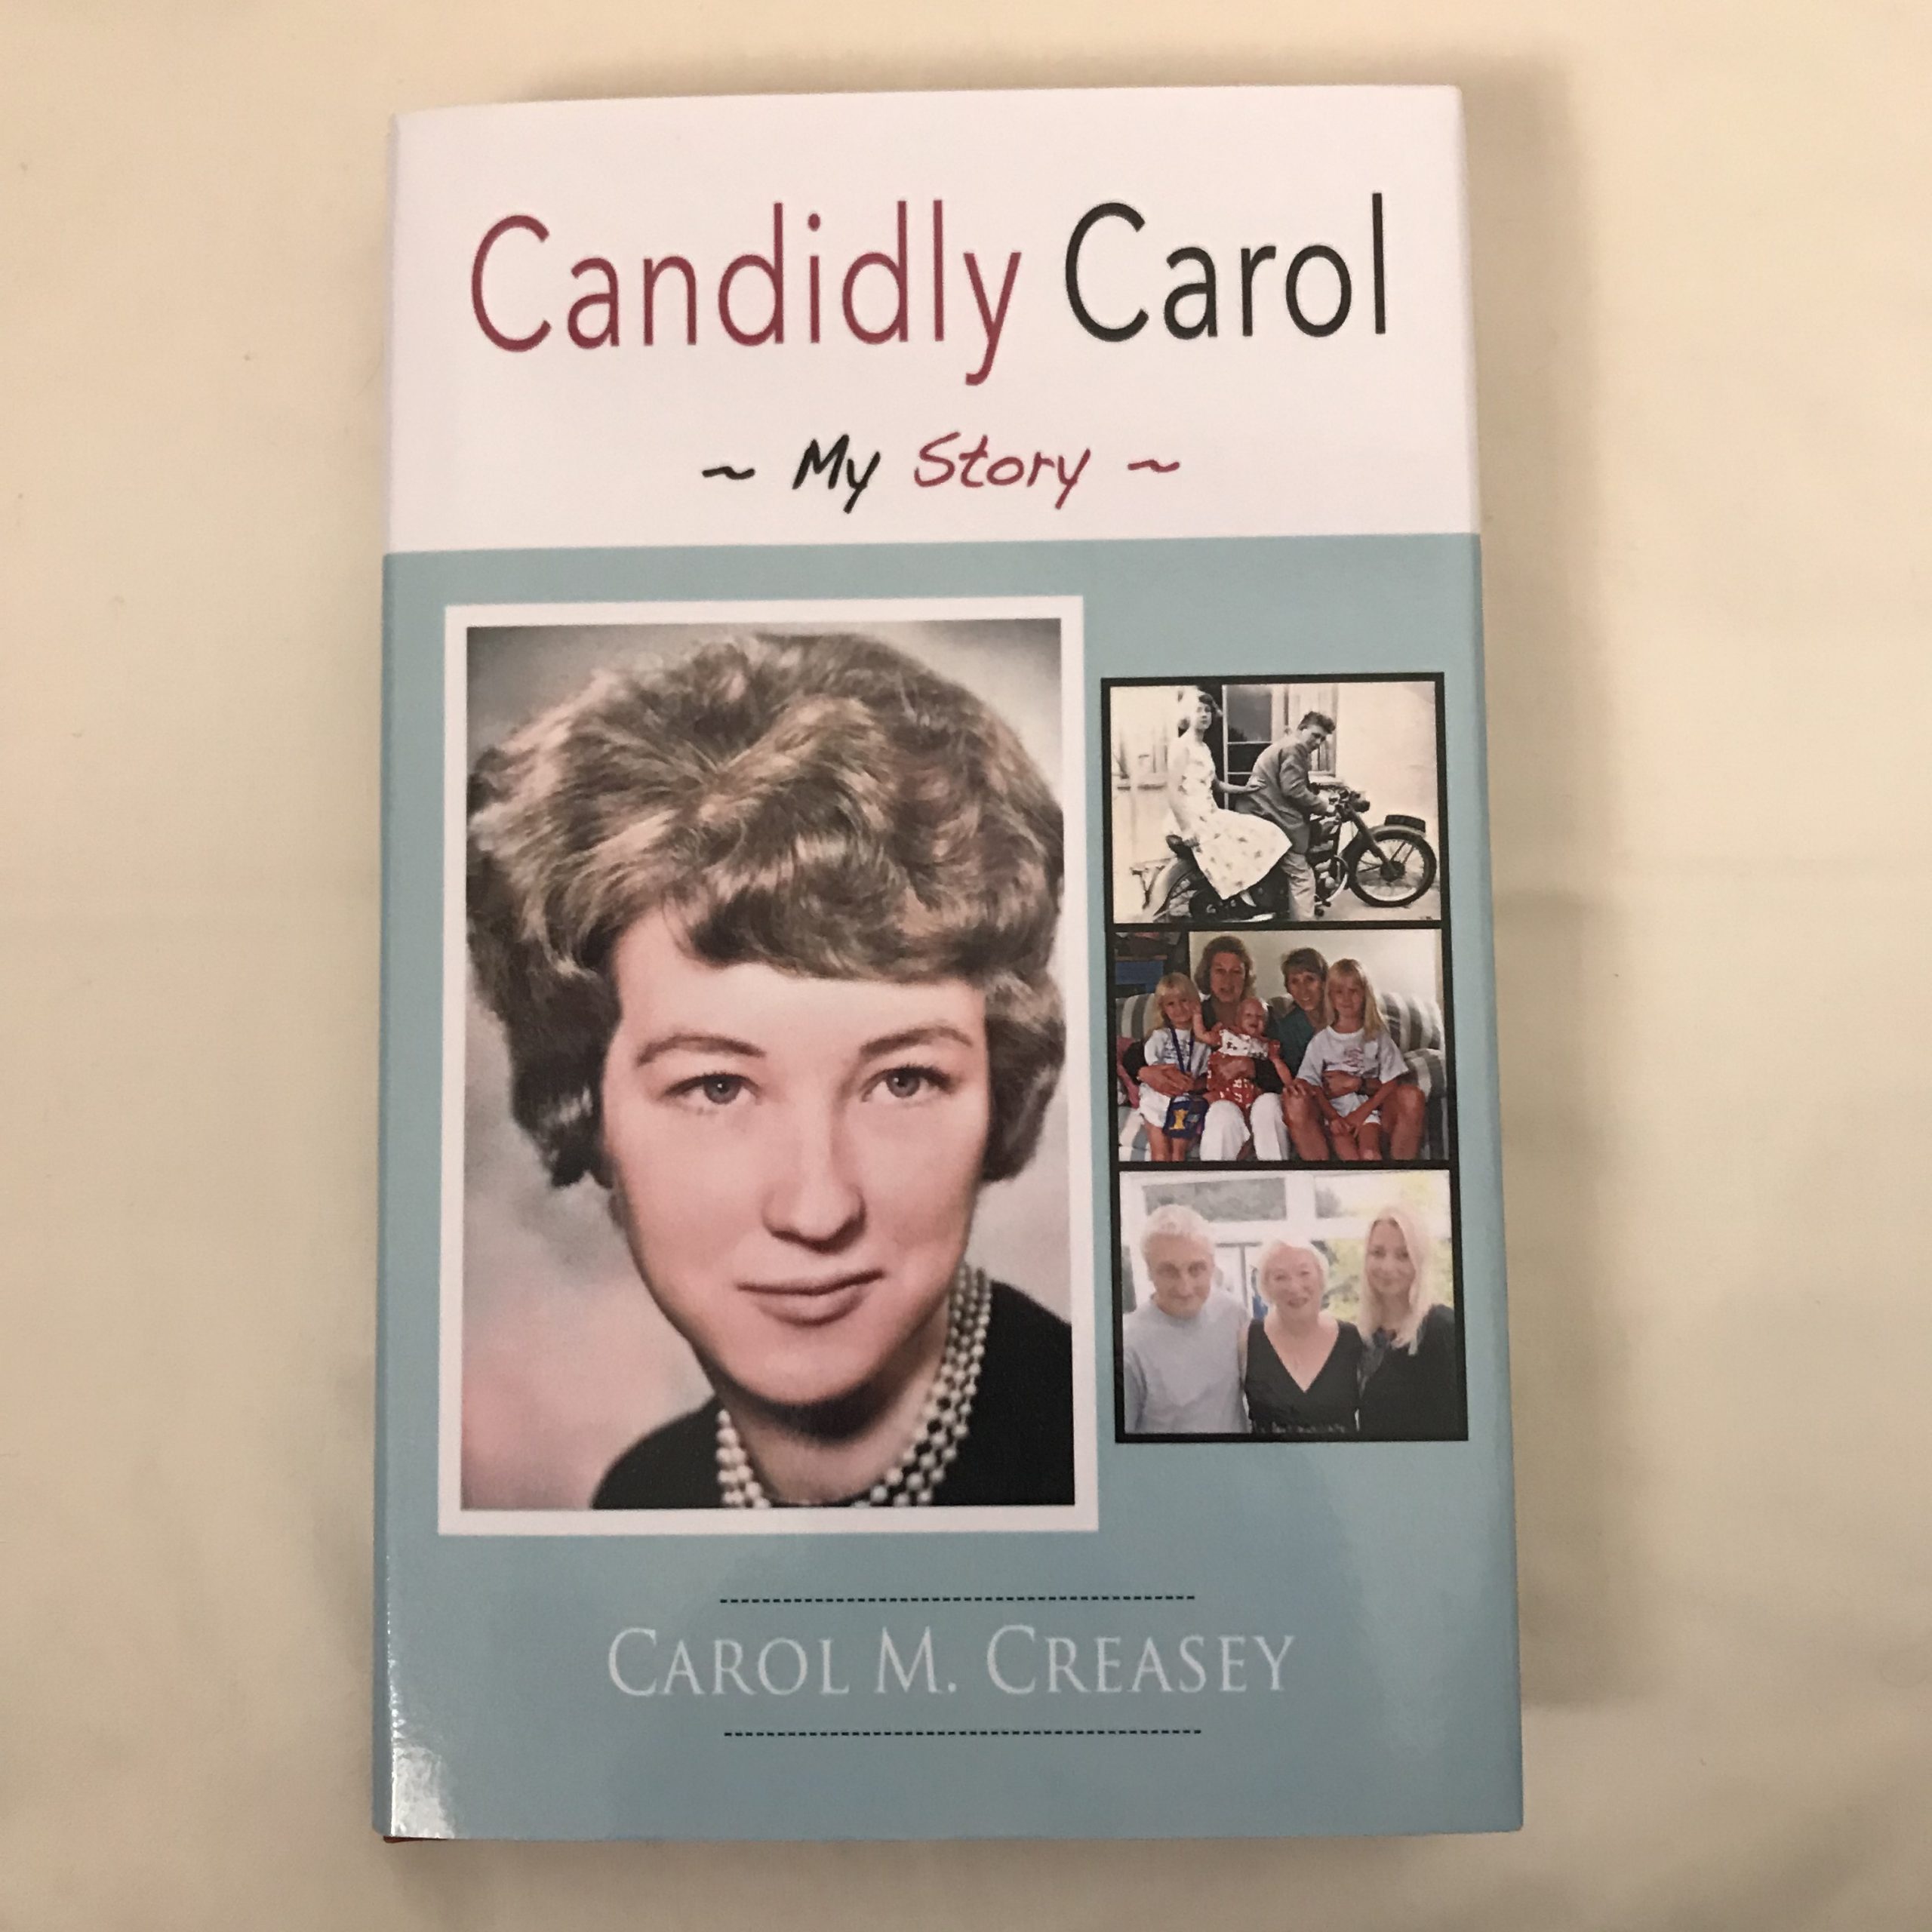 Meet the Author and Book Signing by Carol M Creasey